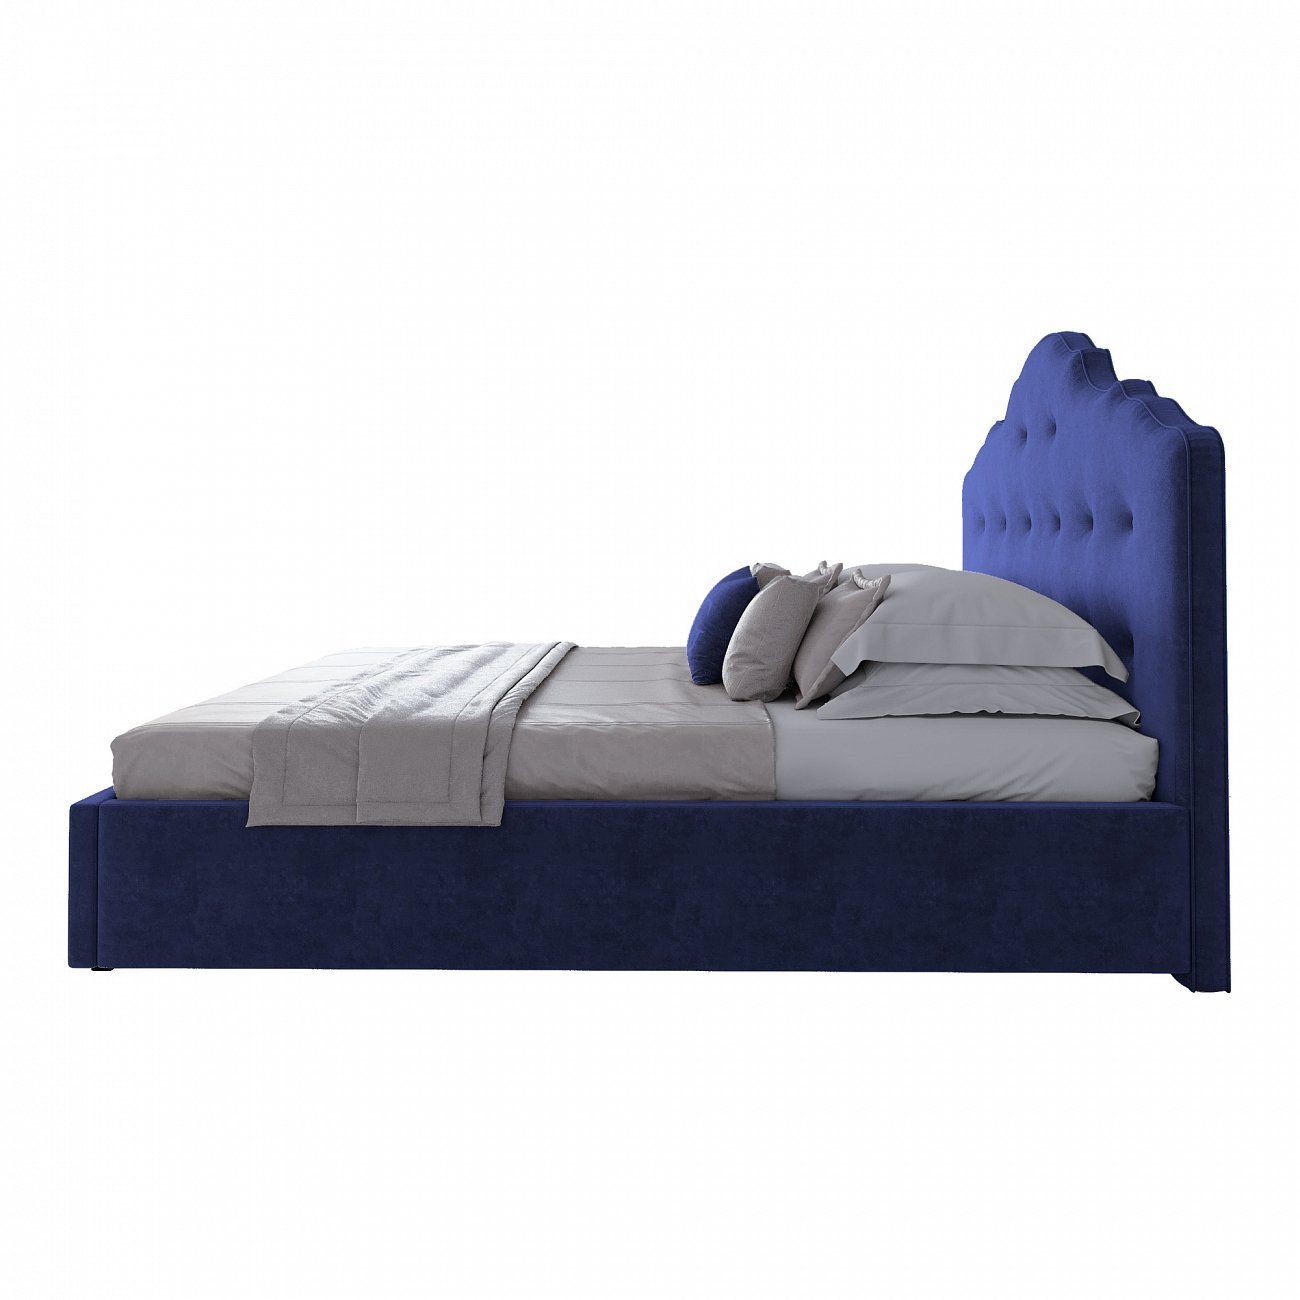 Euro bed 200x200 cm blue Palace